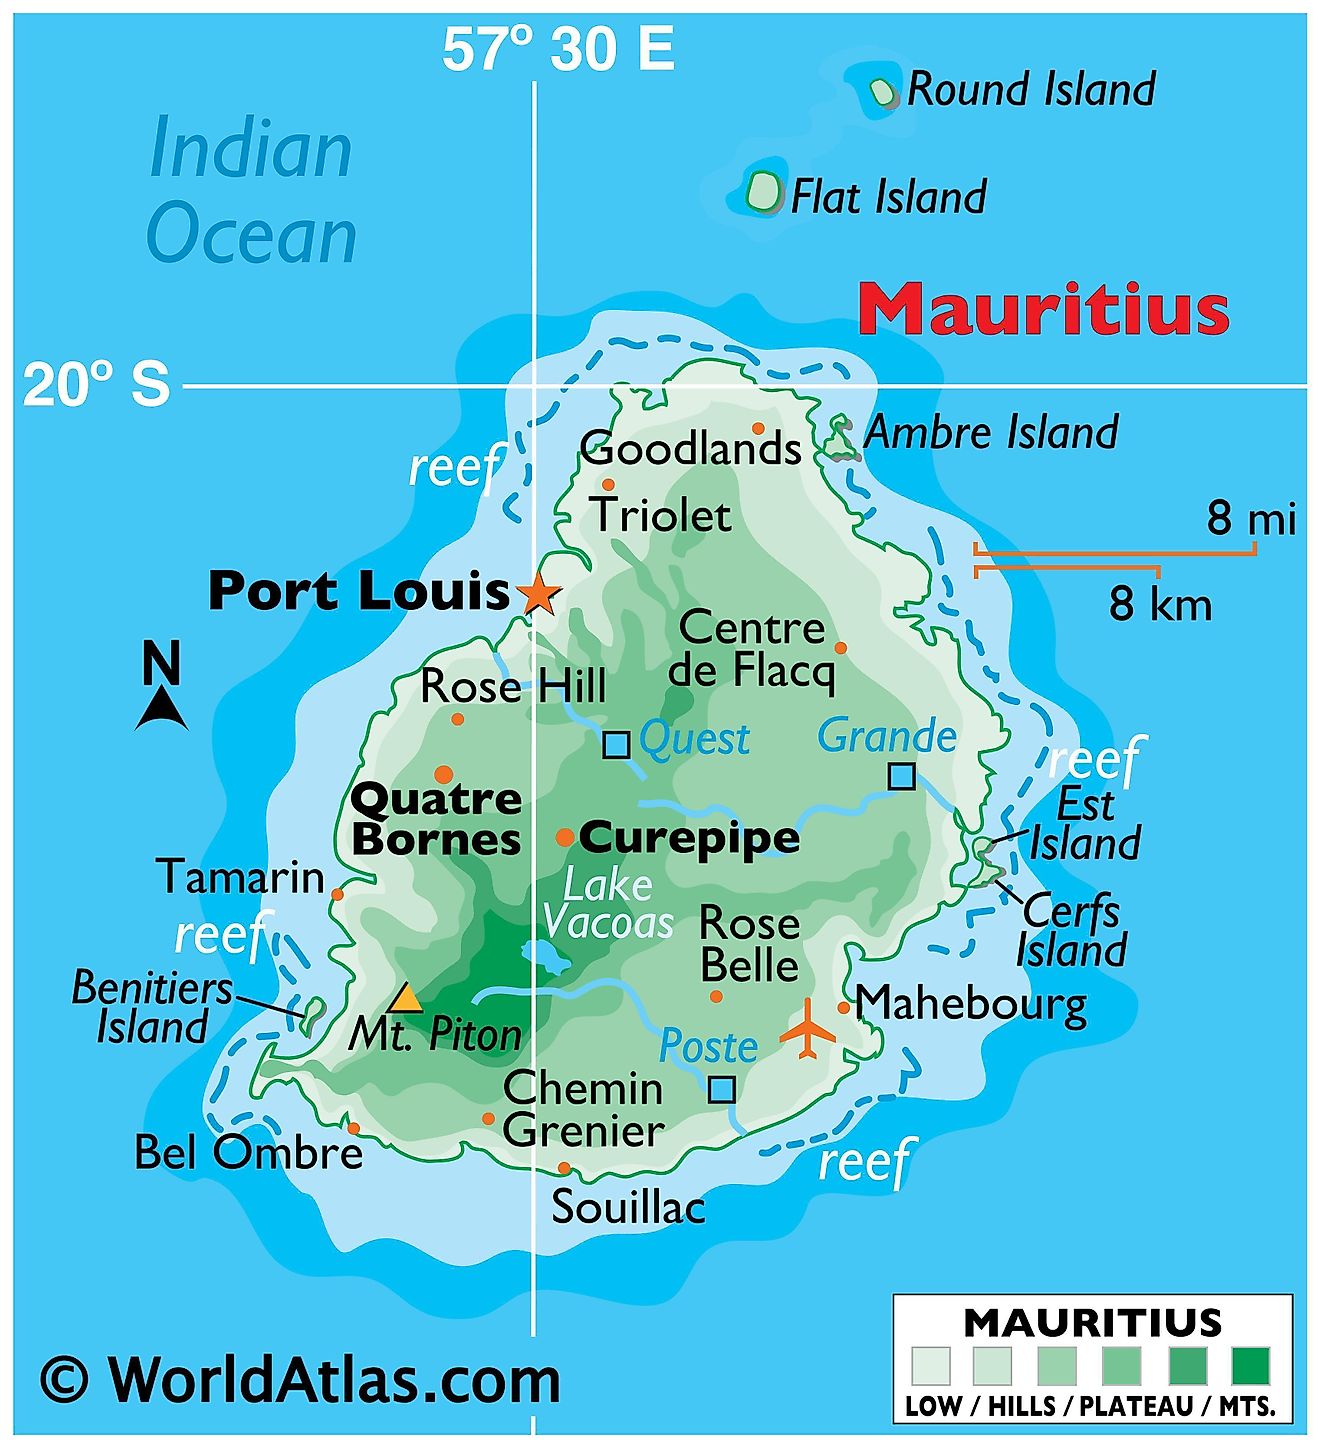 Physical Map of Mauritius showing relief, outlying islands, tallest peak, lakes, major river, and important cities.